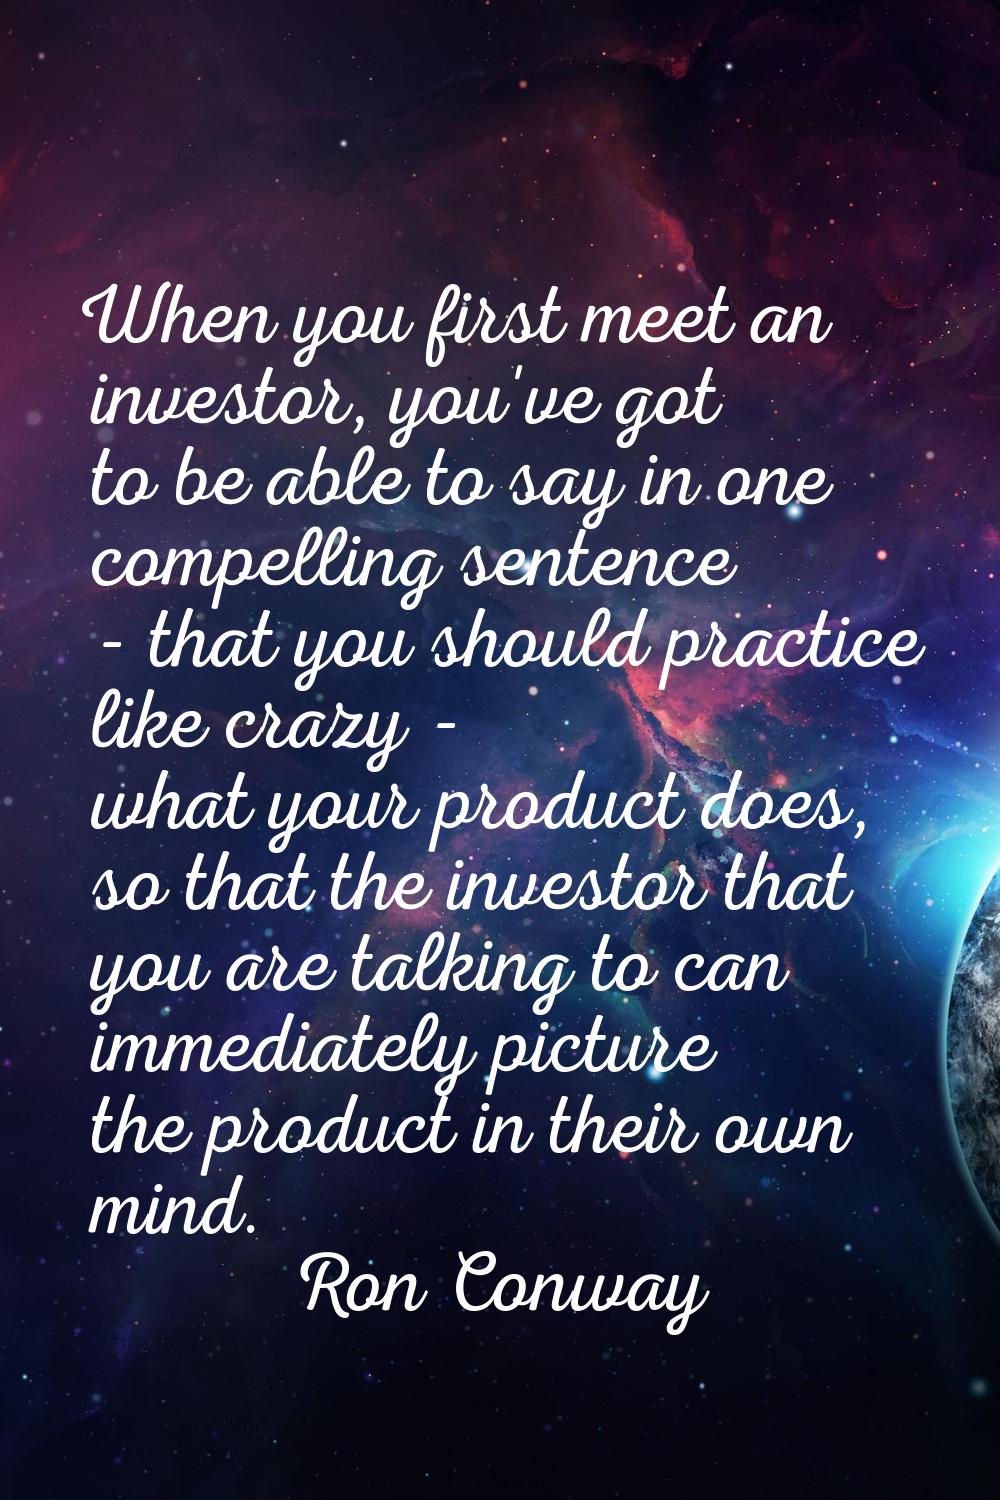 When you first meet an investor, you've got to be able to say in one compelling sentence - that you